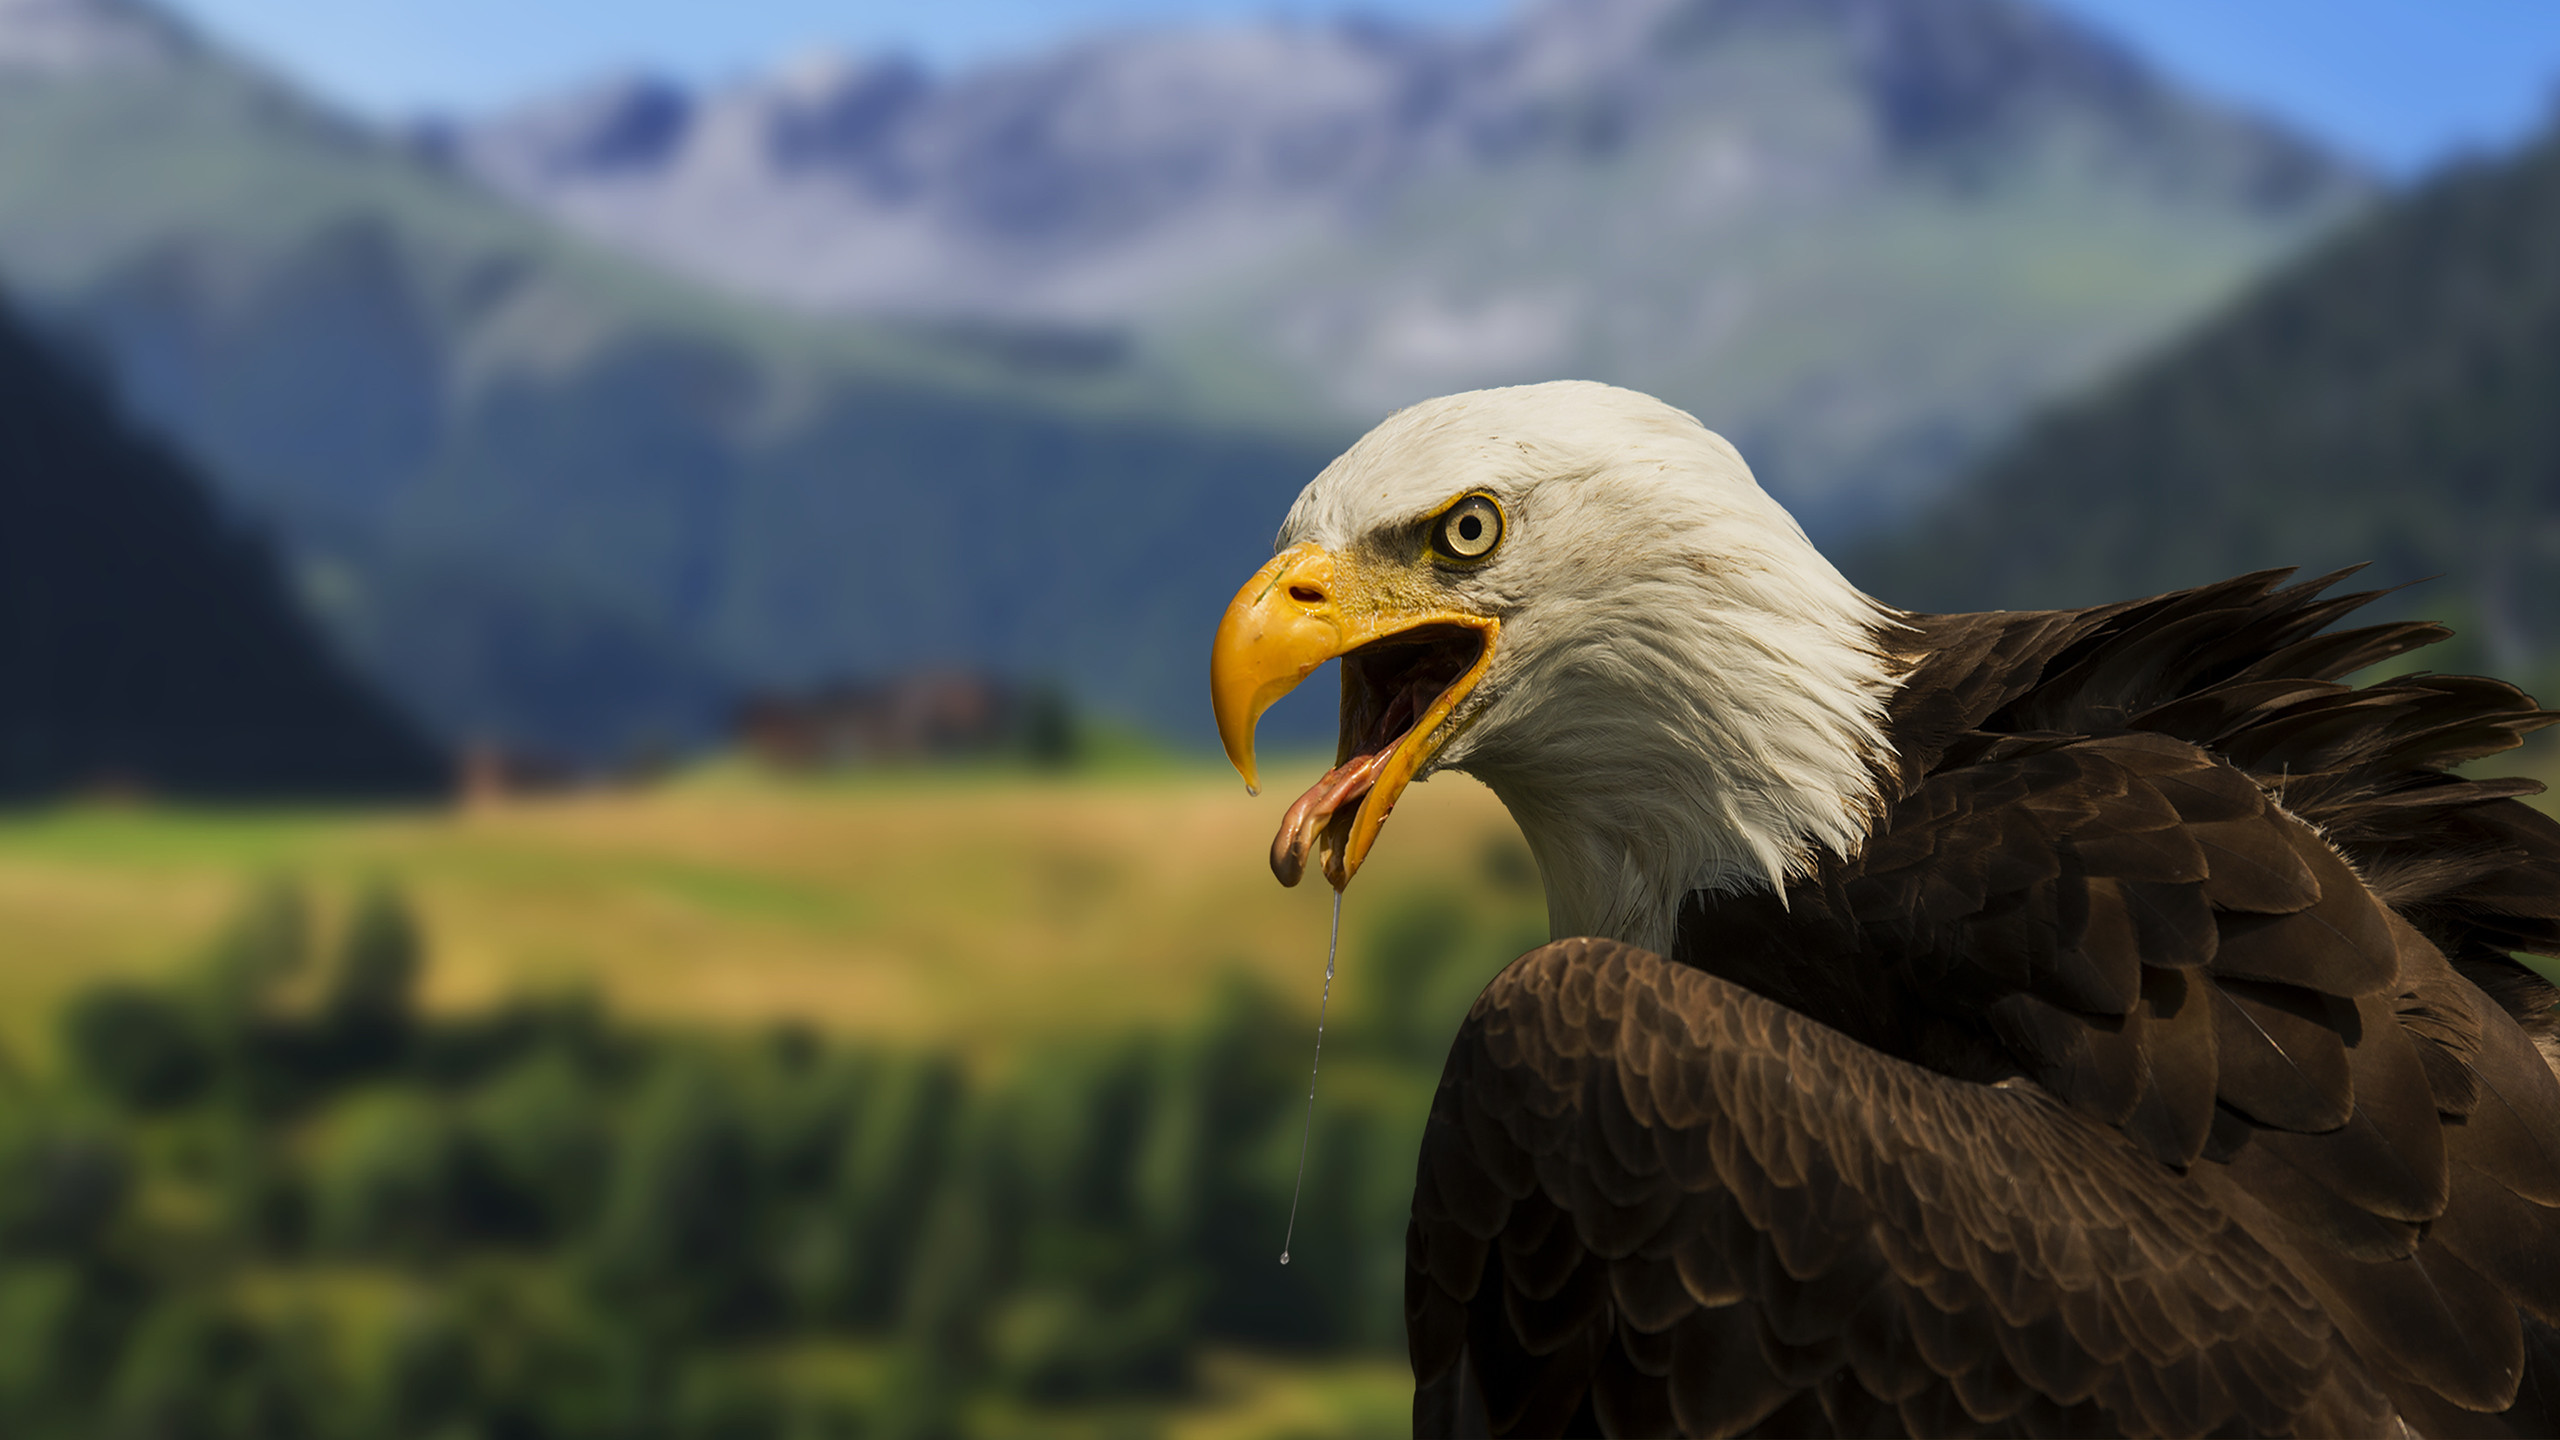 2560x1440 Posted by gags at 4:12 am Tagged with: Bald Eagles, Patriotism, Symbols,  The United States Of America, Wallpaper Of The Day